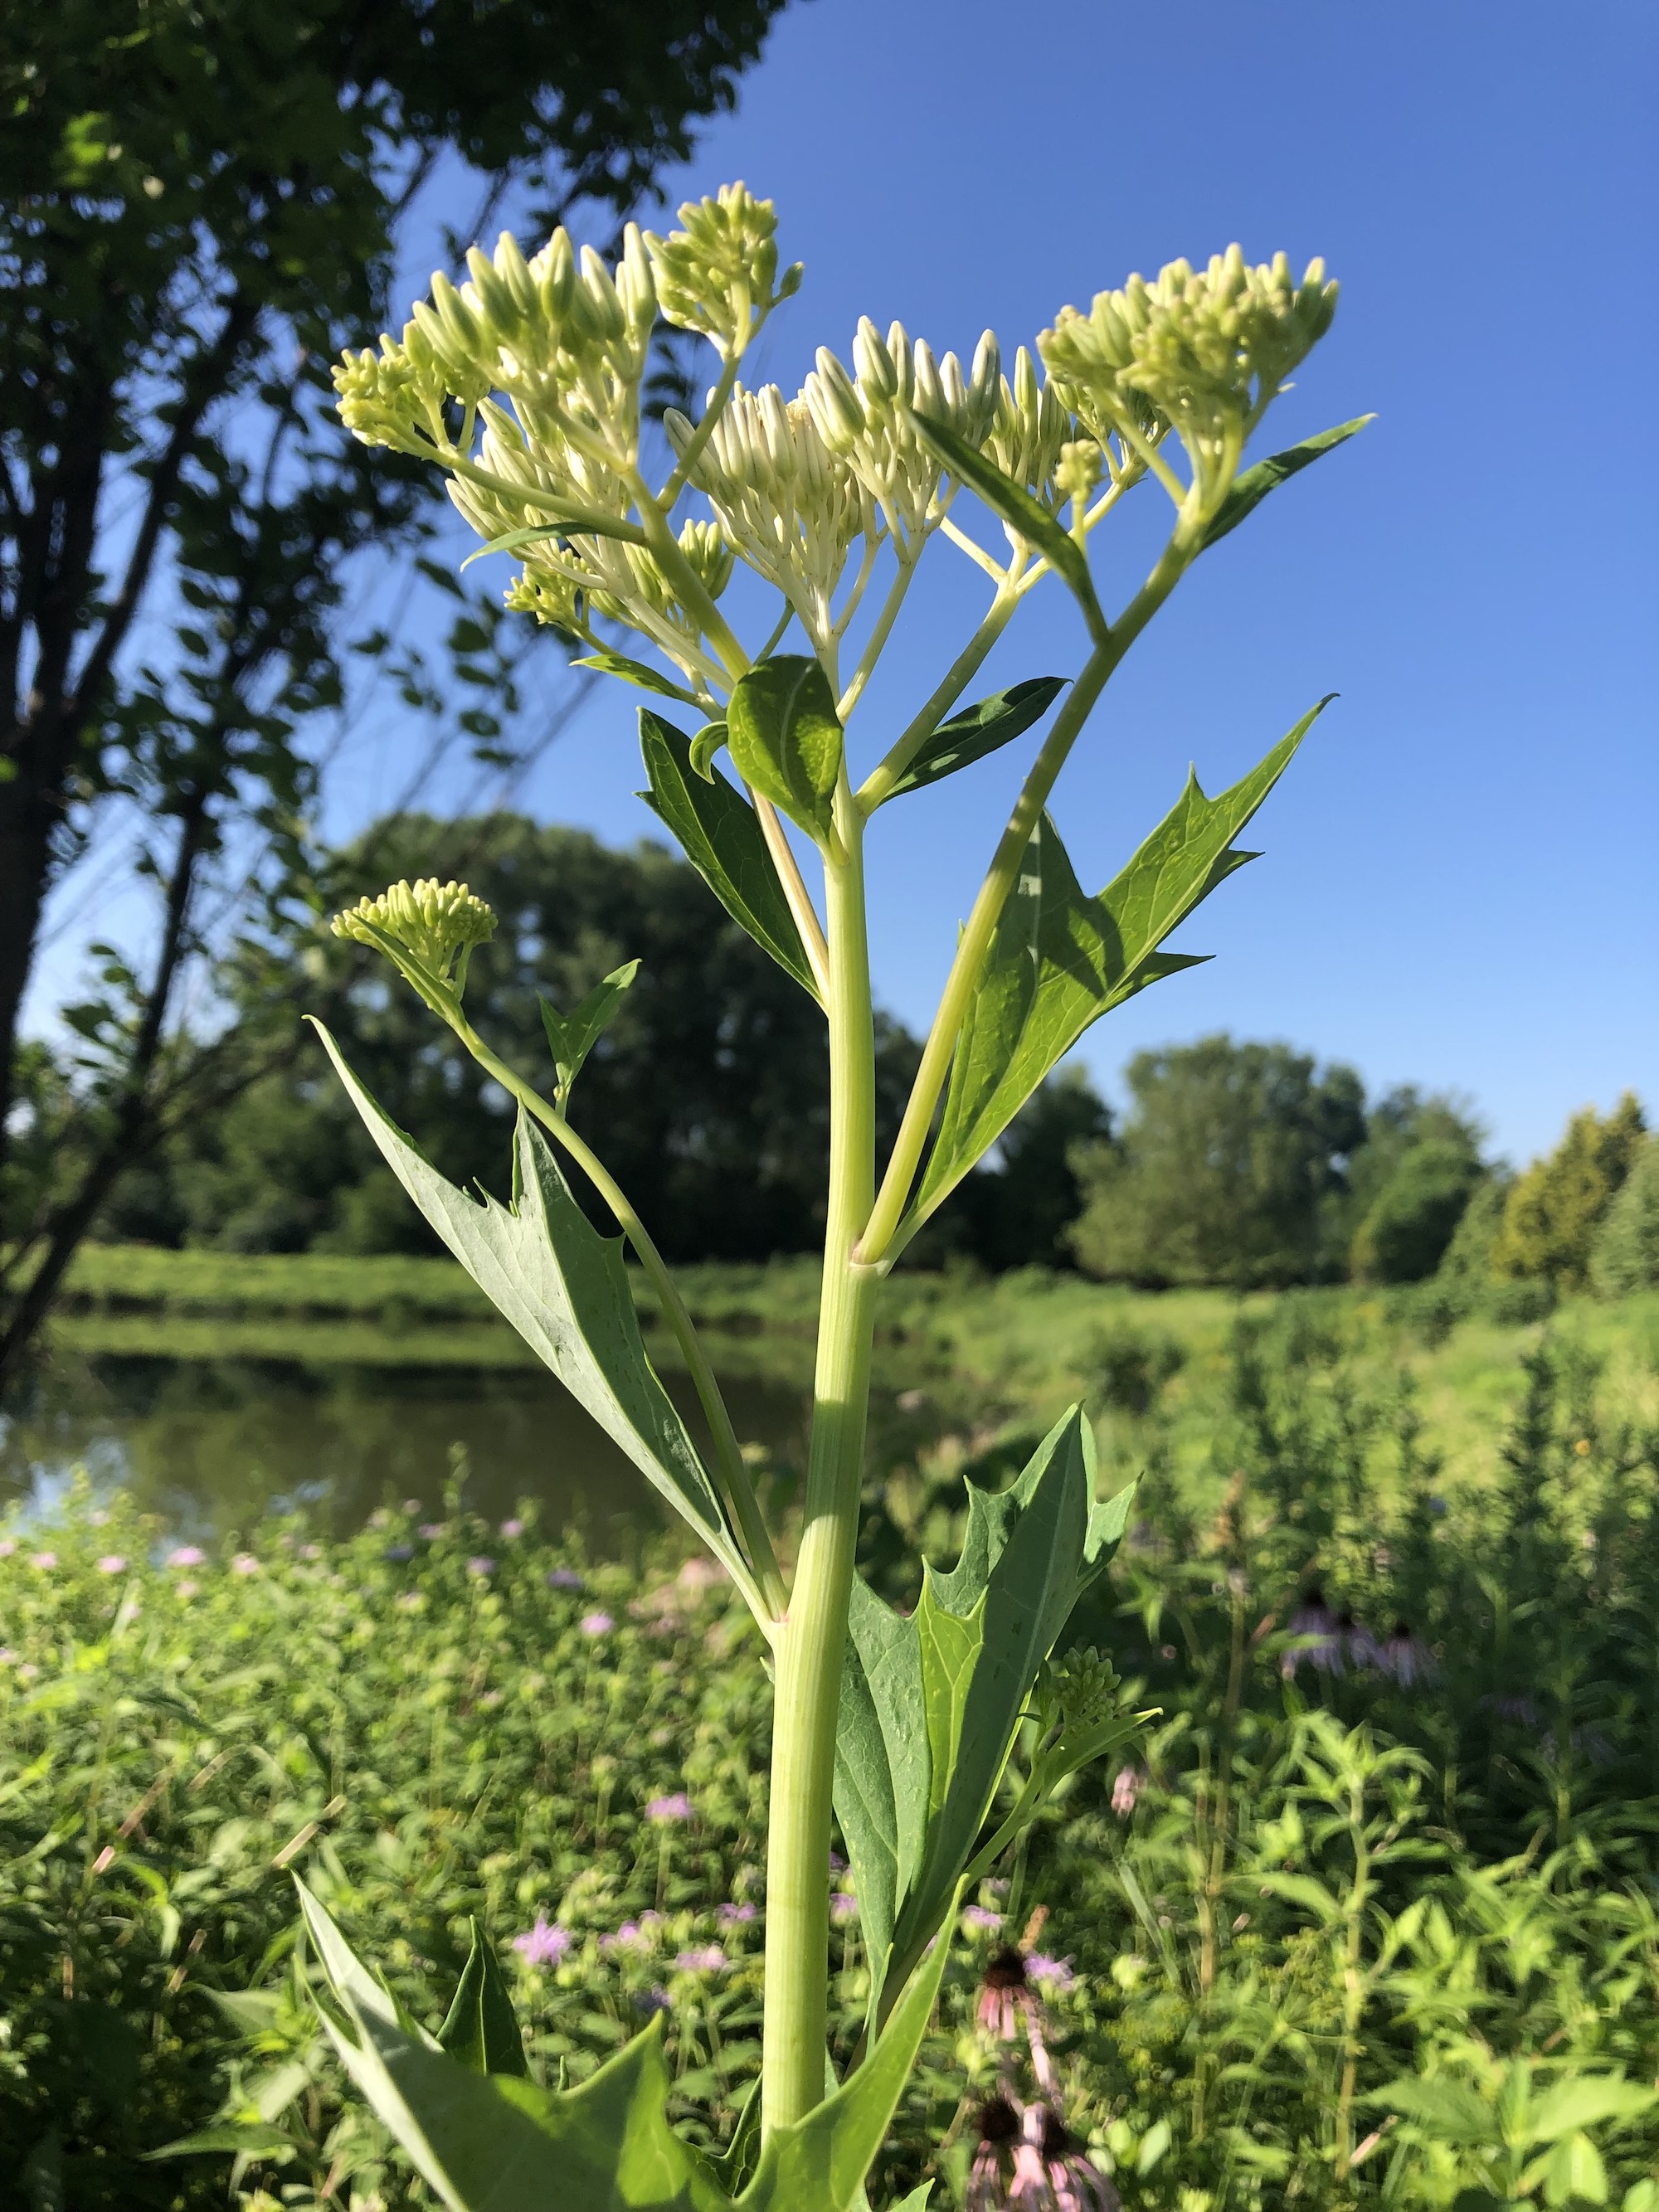 Pale Indian Plantain on bank of retaining pond on corner of Nakoma Road and Manitou Way in Madison, Wisconsin on July 12, 2019.